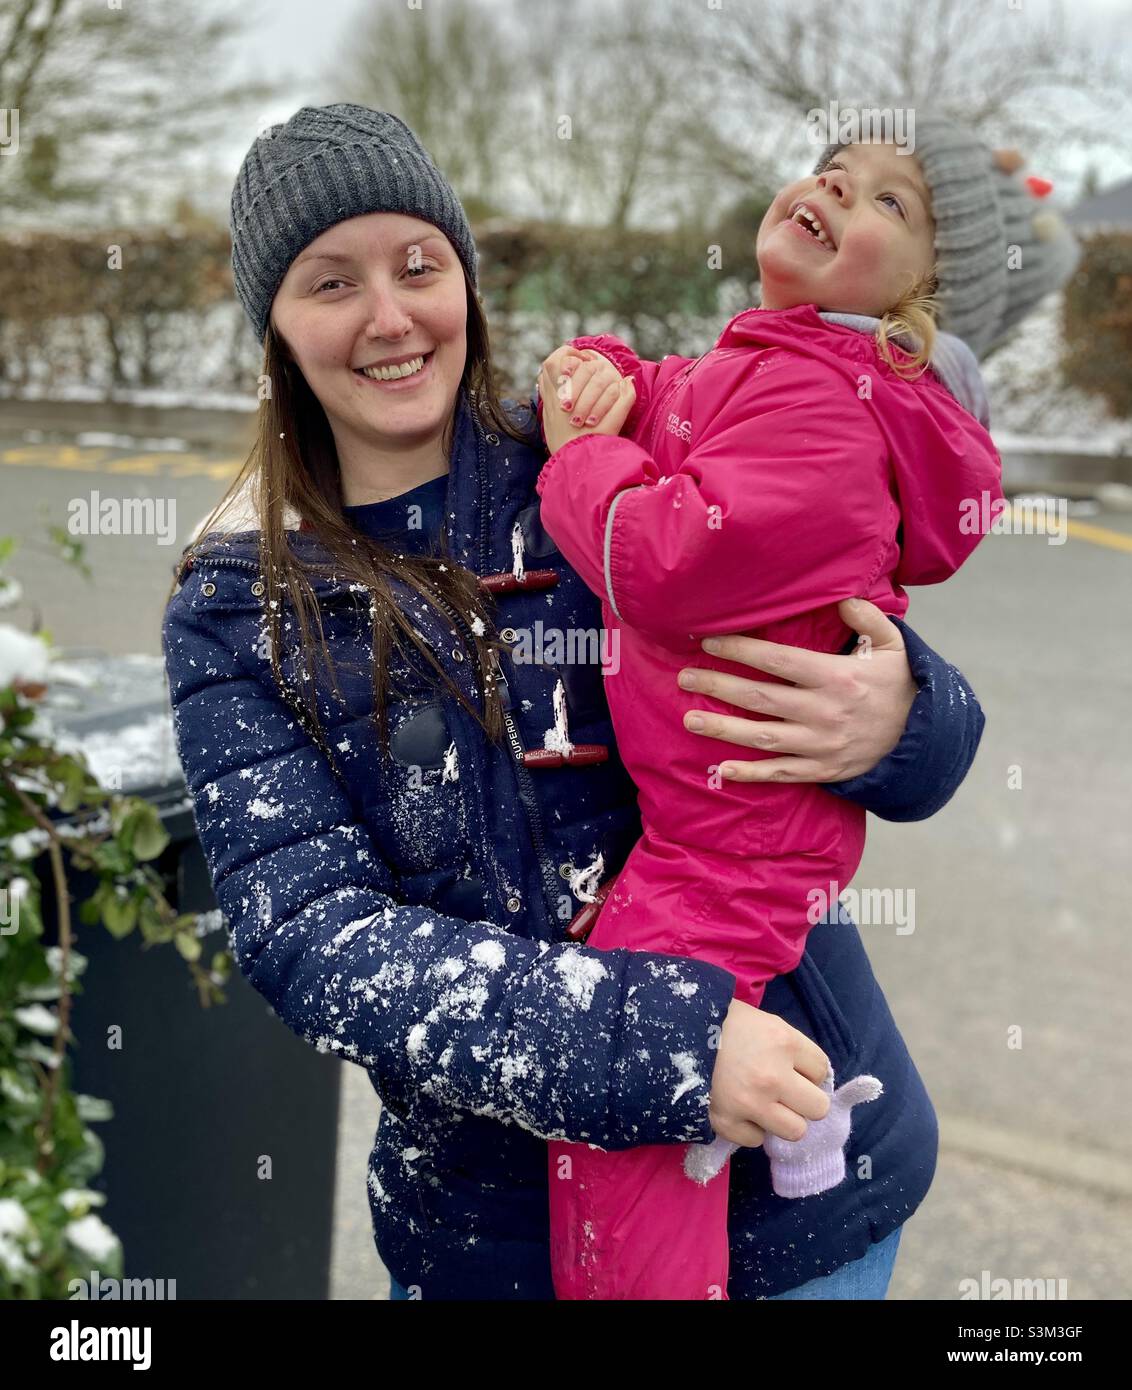 Winter Fun. Happy image of young, smiling woman holding a rosy cheeked toddler. Both wearing warm, outdoor clothing. Snow evident. Stock Photo